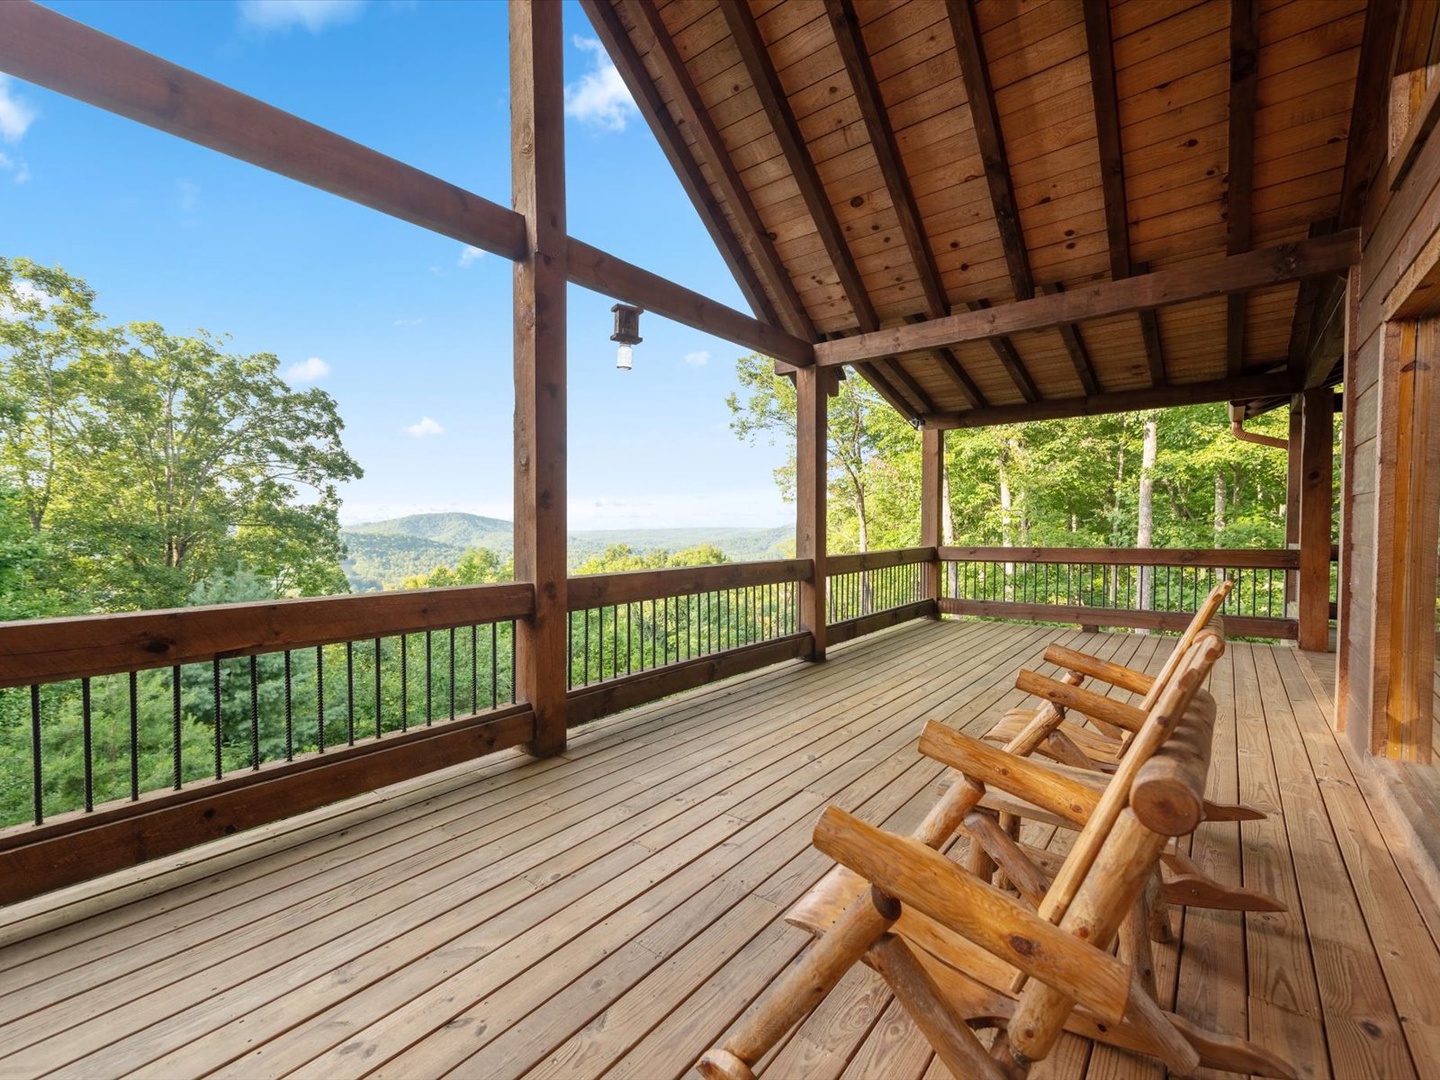 Crows Nest- Entry level deck with rocking chair